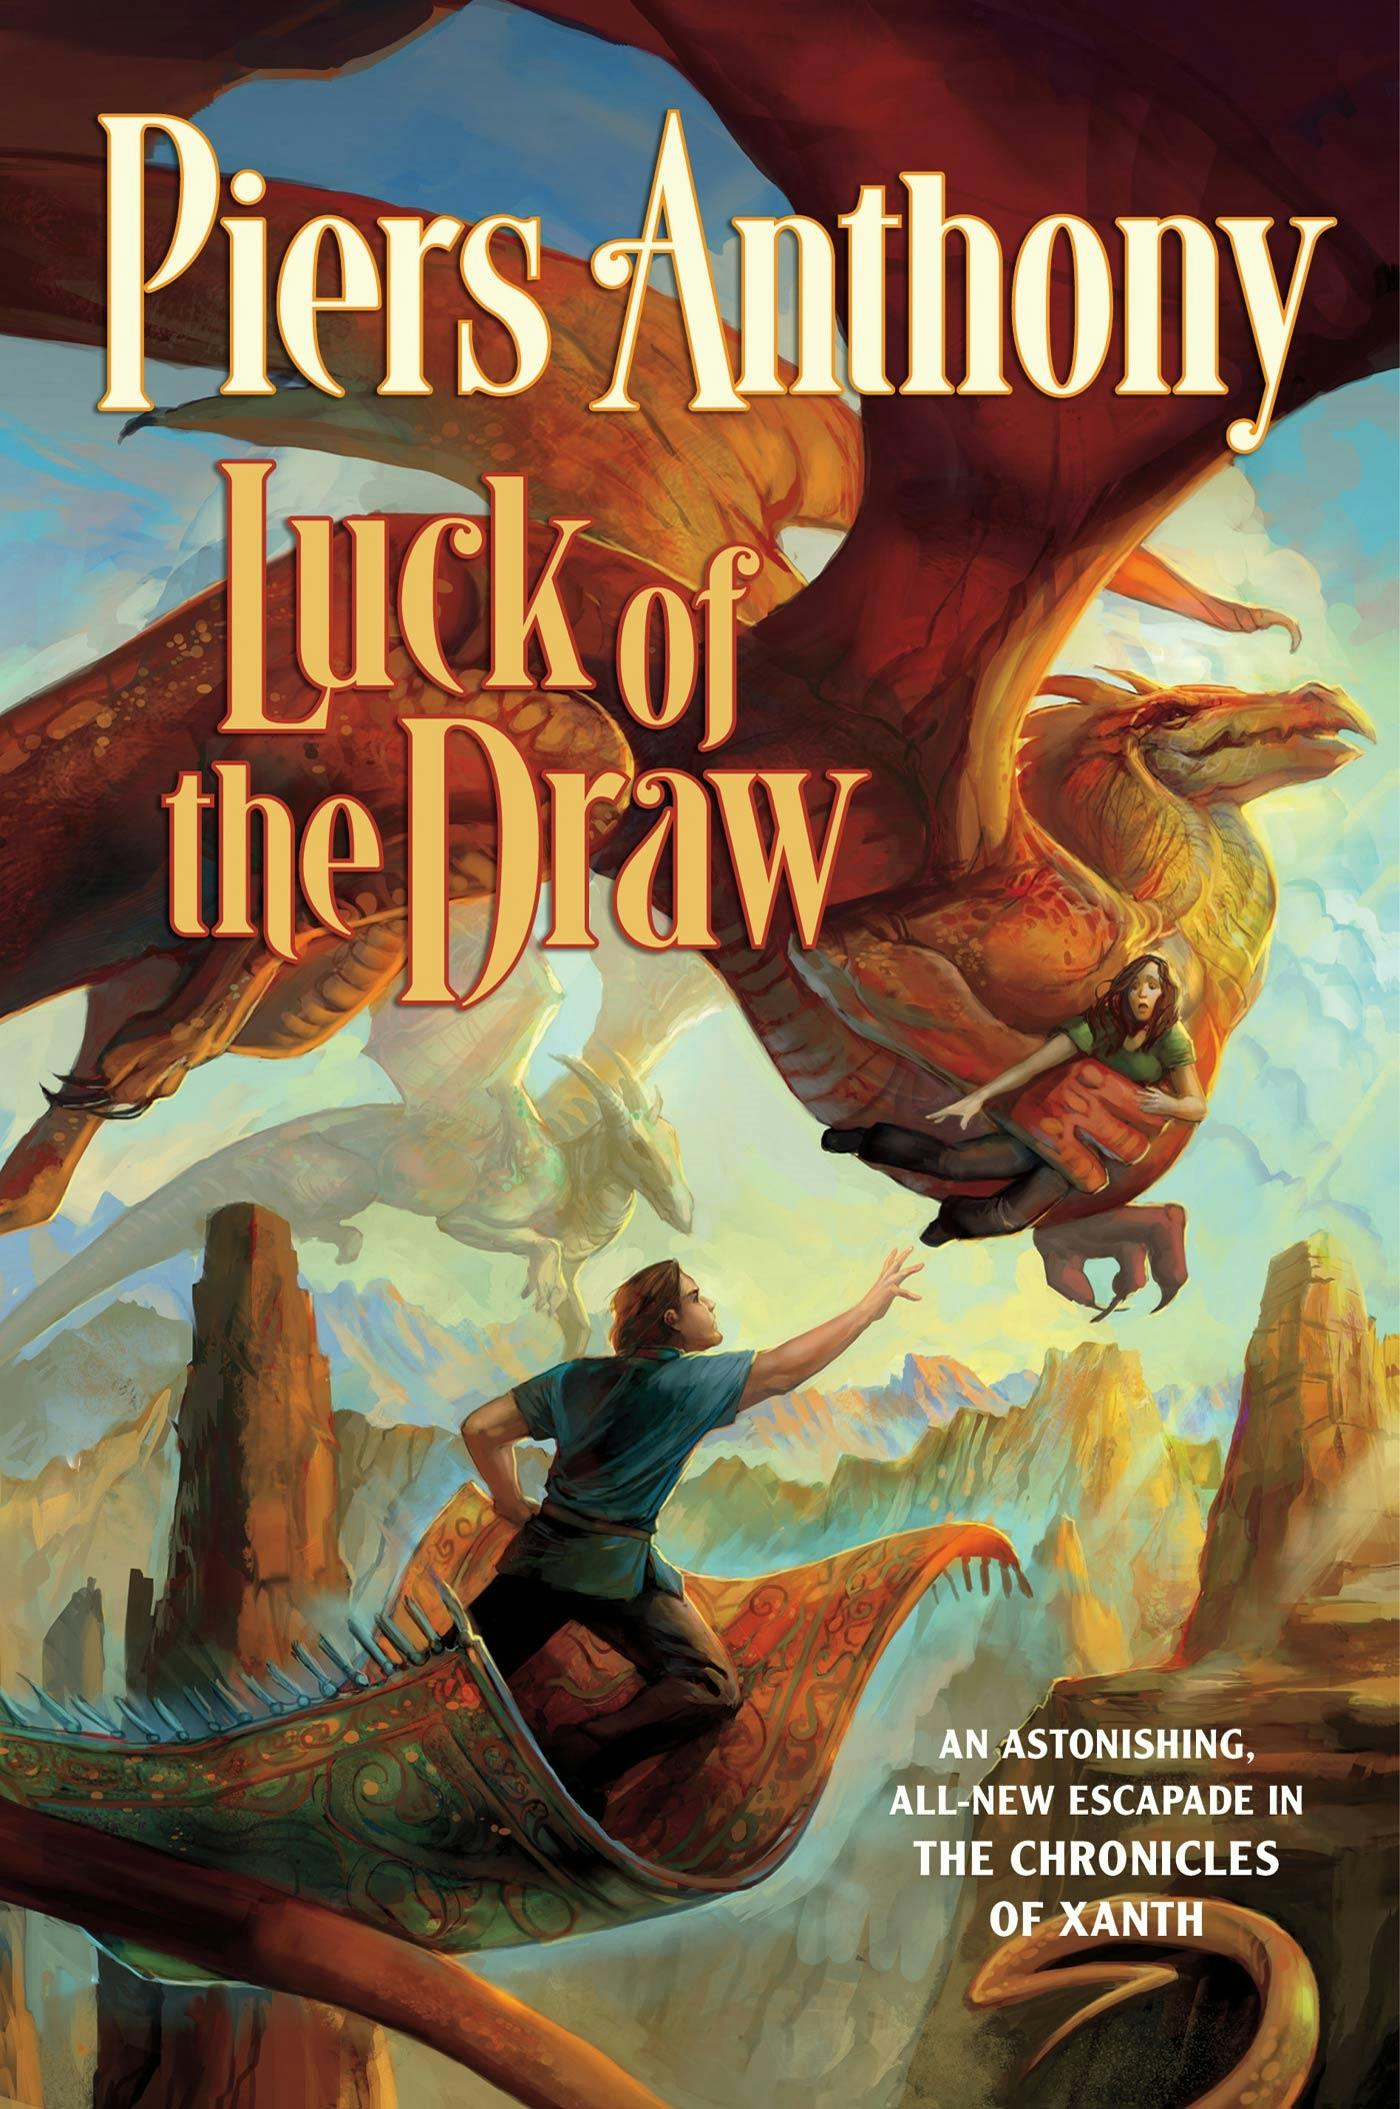 Cover for the book titled as: Luck of the Draw